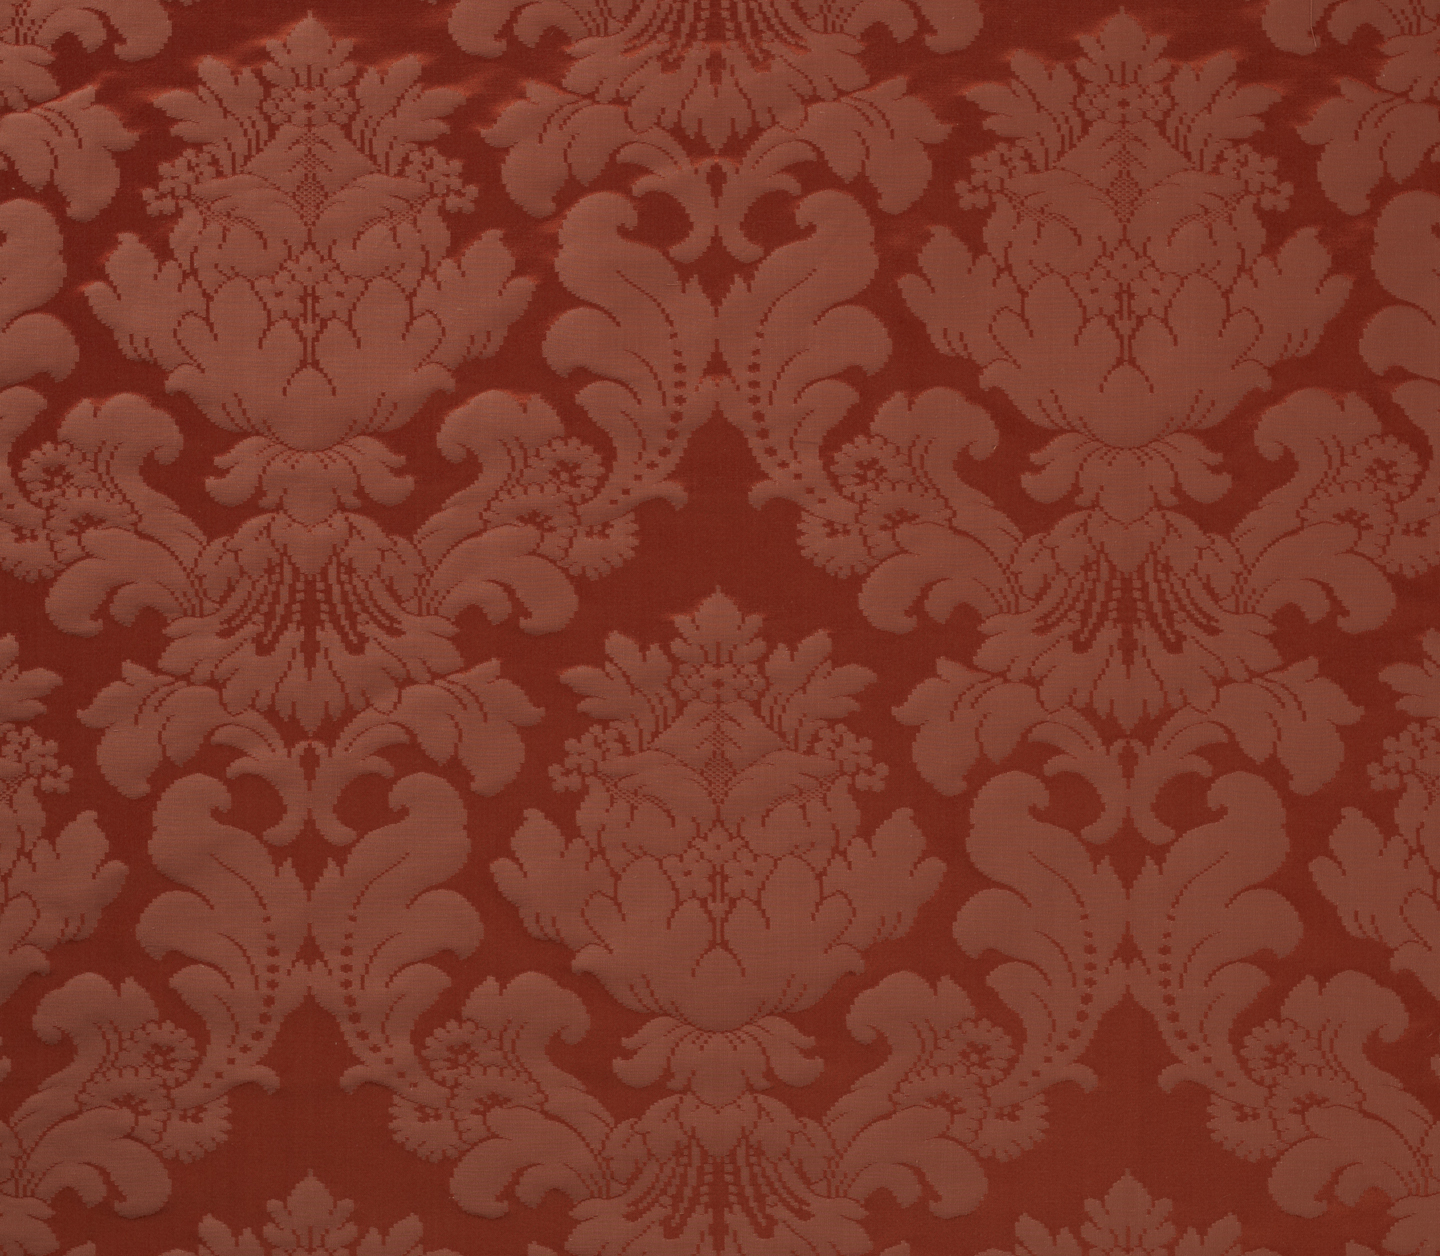 Burgundy And Gold Damask for Pinterest 1440x1256